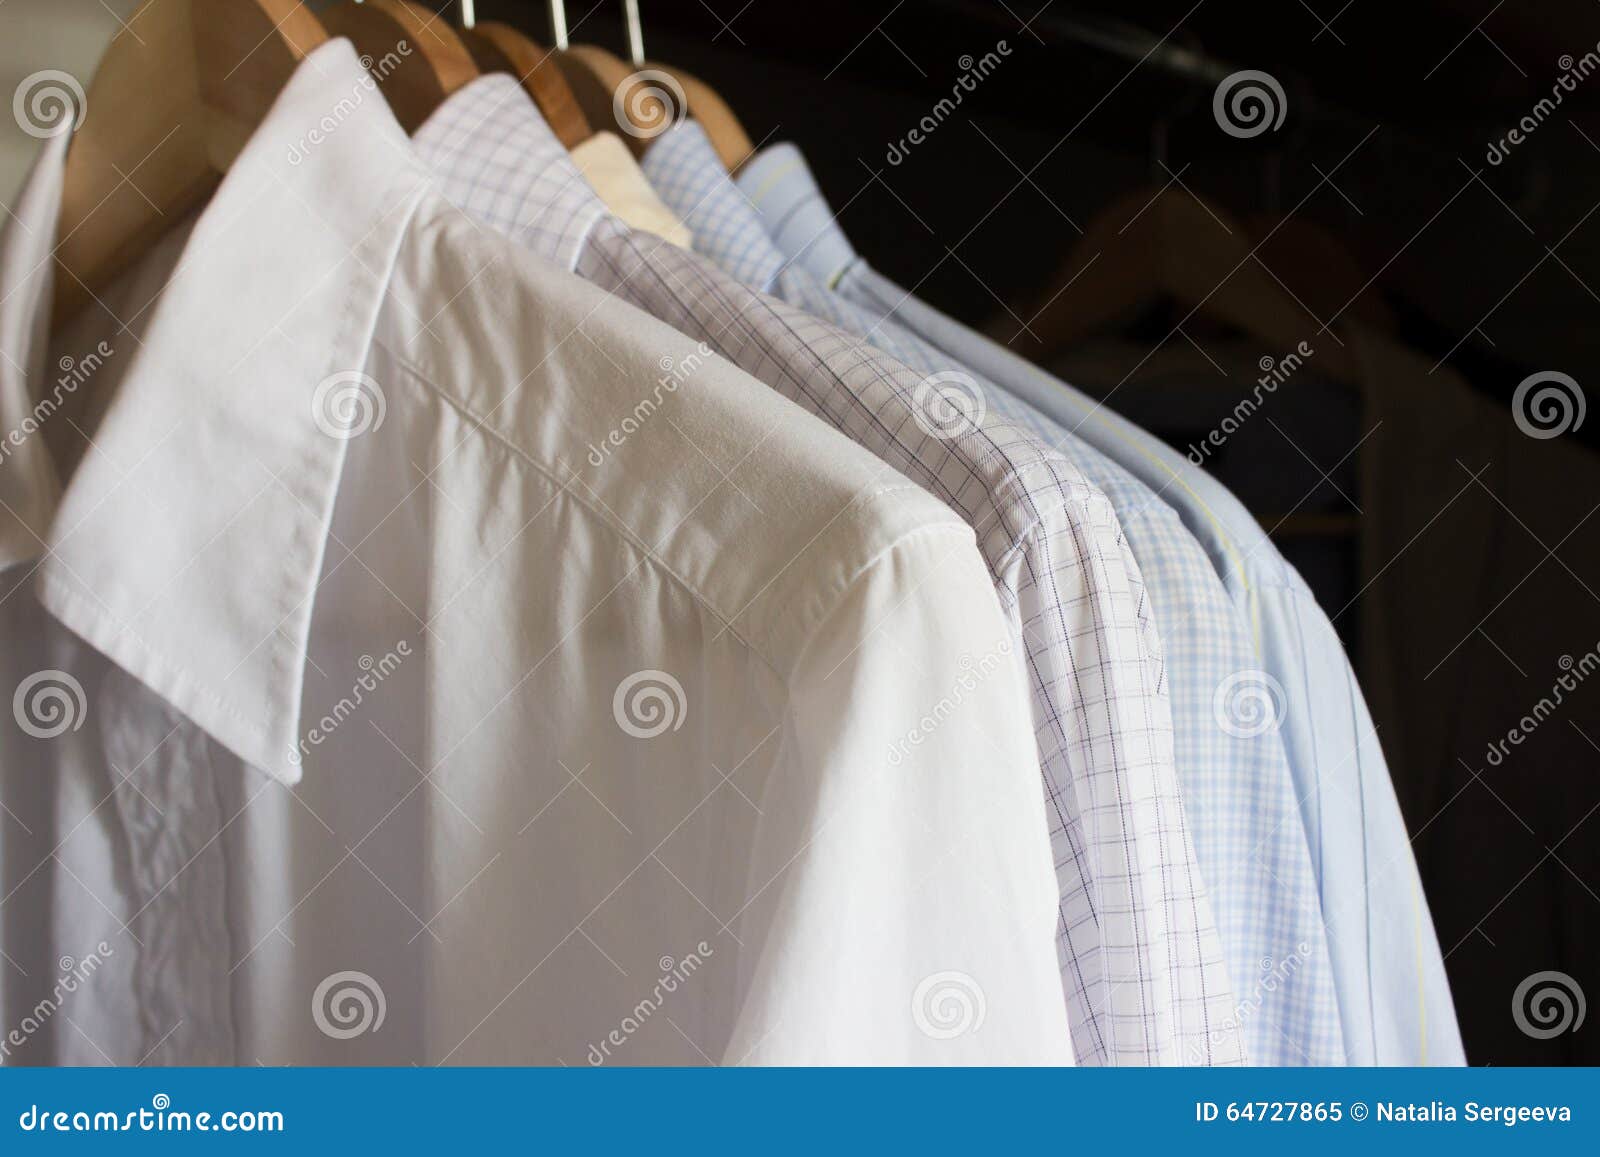 Shirts in a wardrobe stock image. Image of attire, wear - 64727865